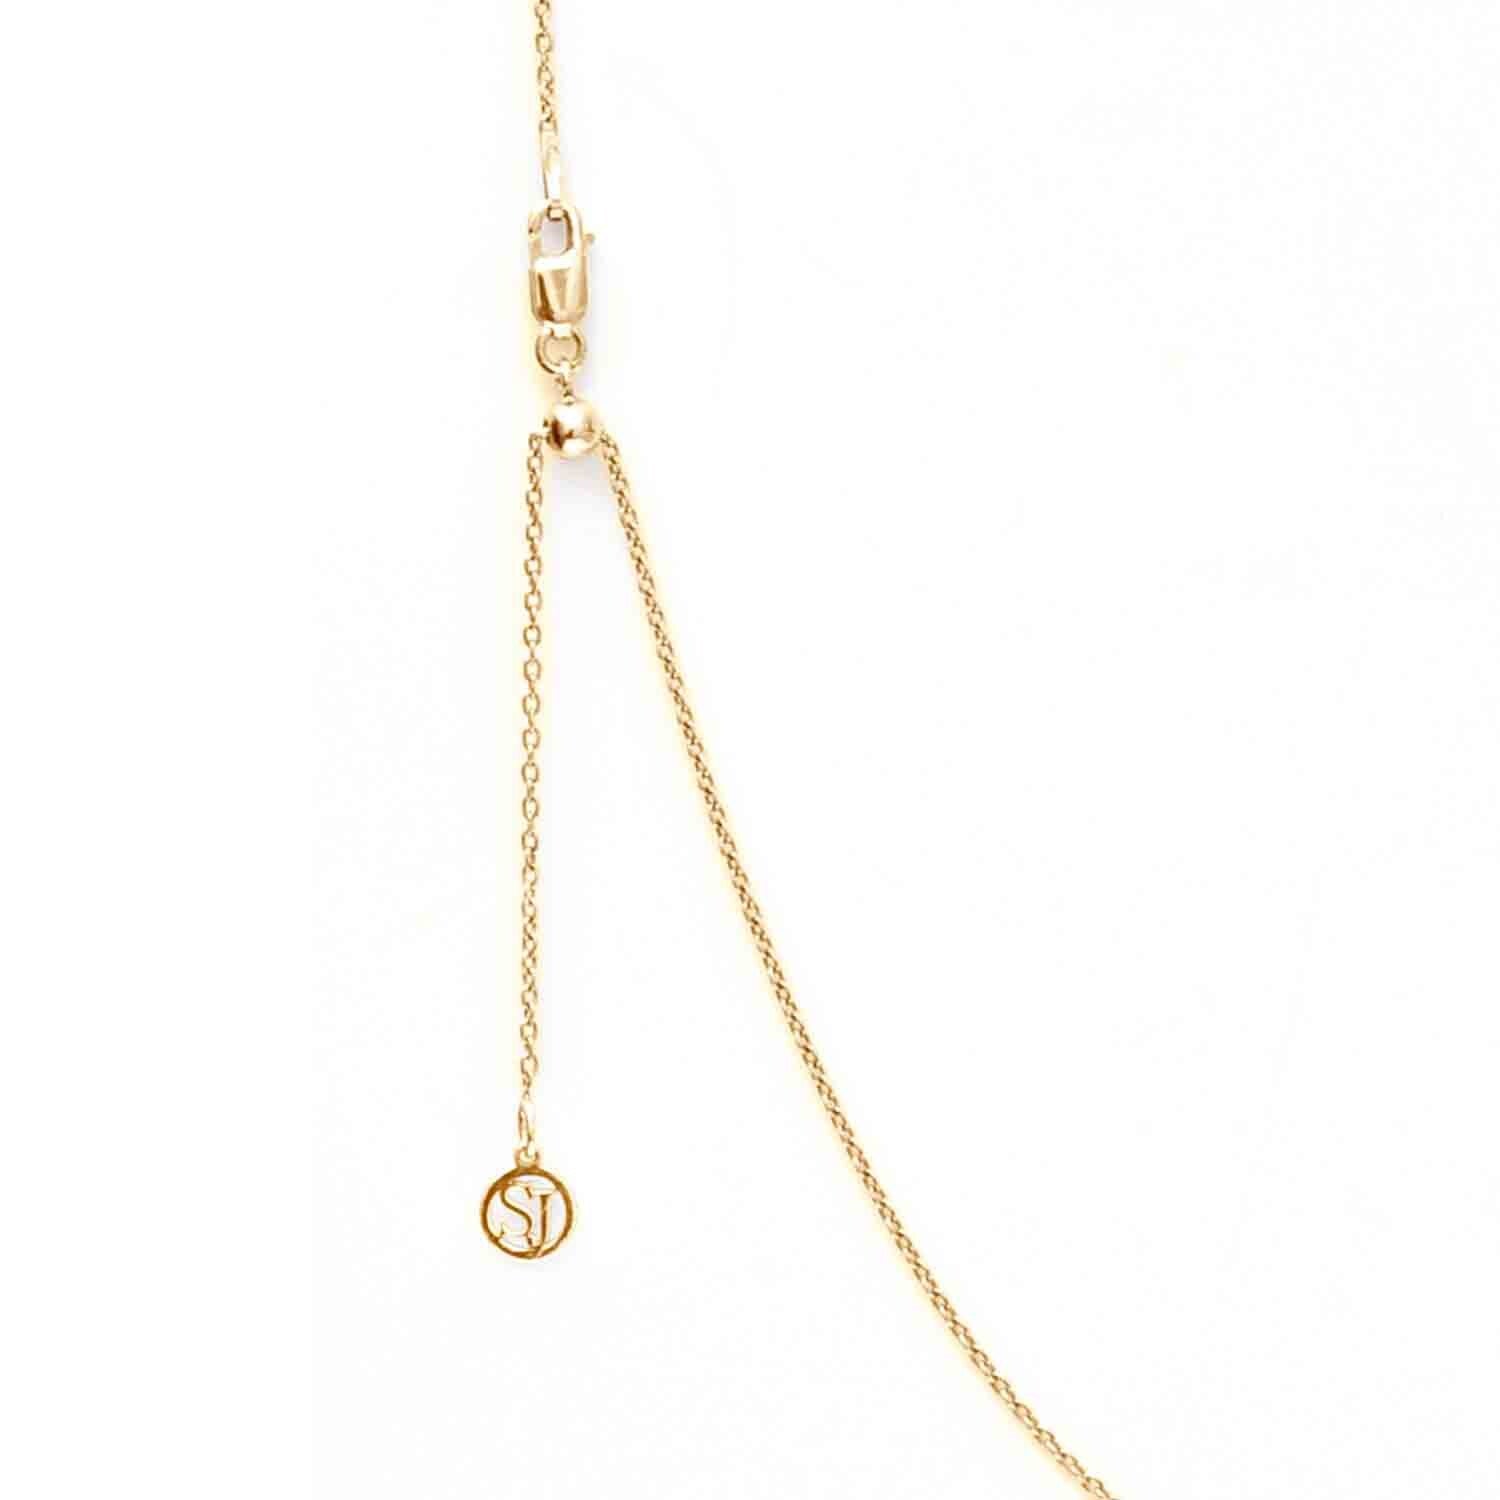 18K gold plated | 45-60 cm, 18K gold plated | 38-45 cm